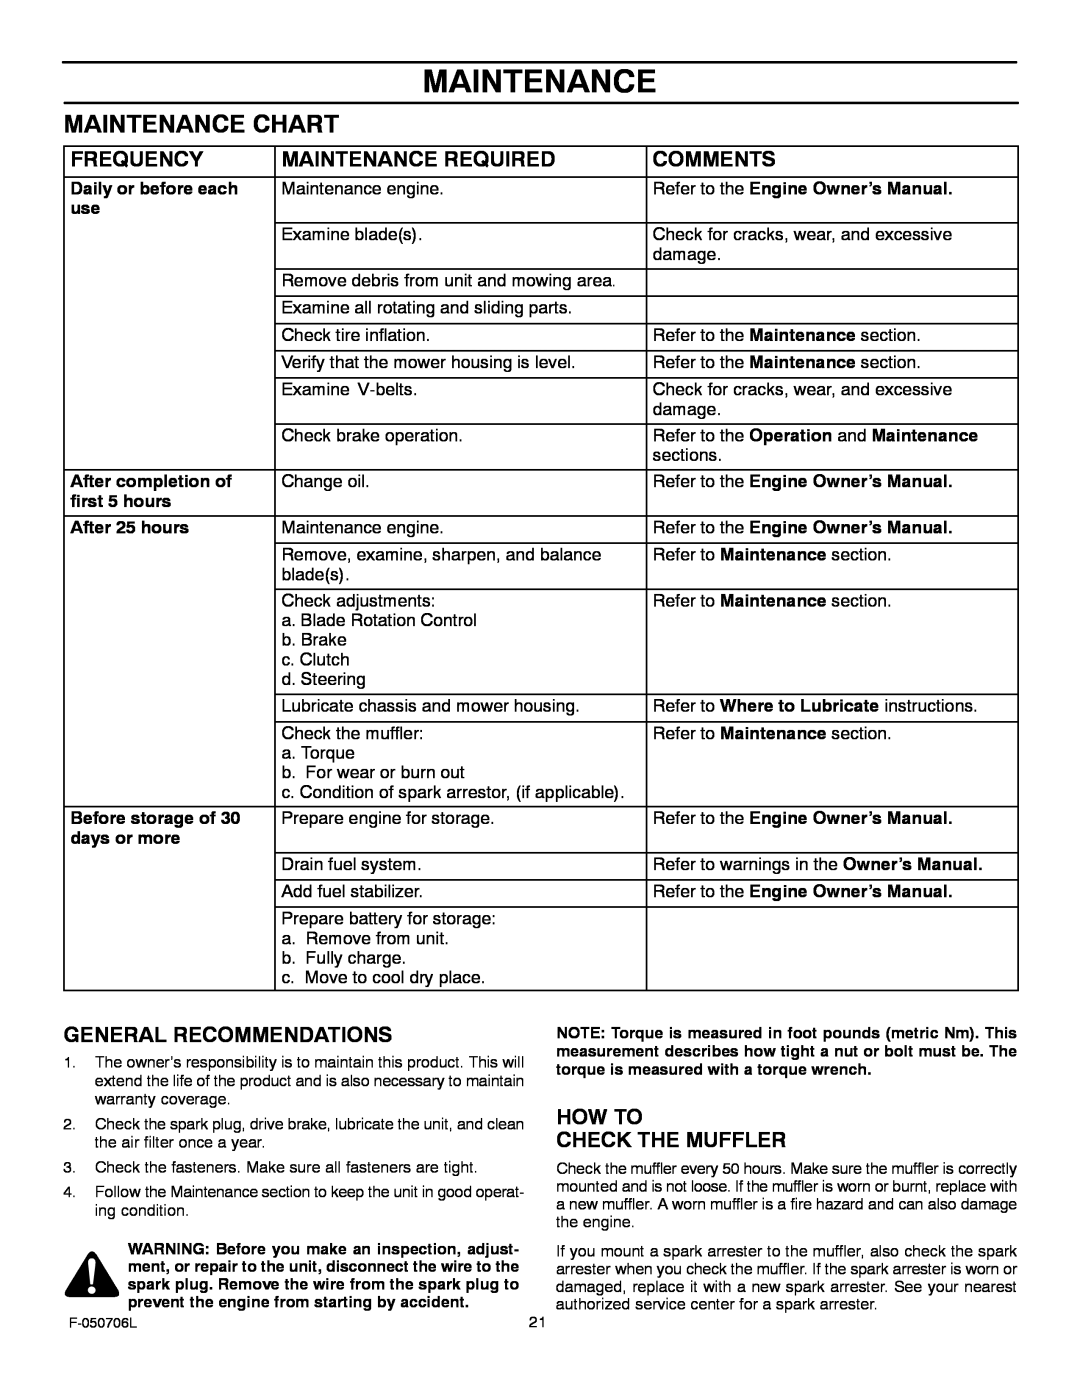 Murray 425014x92B manual Maintenance Chart, Frequency, Maintenance Required, Comments, General Recommendations 